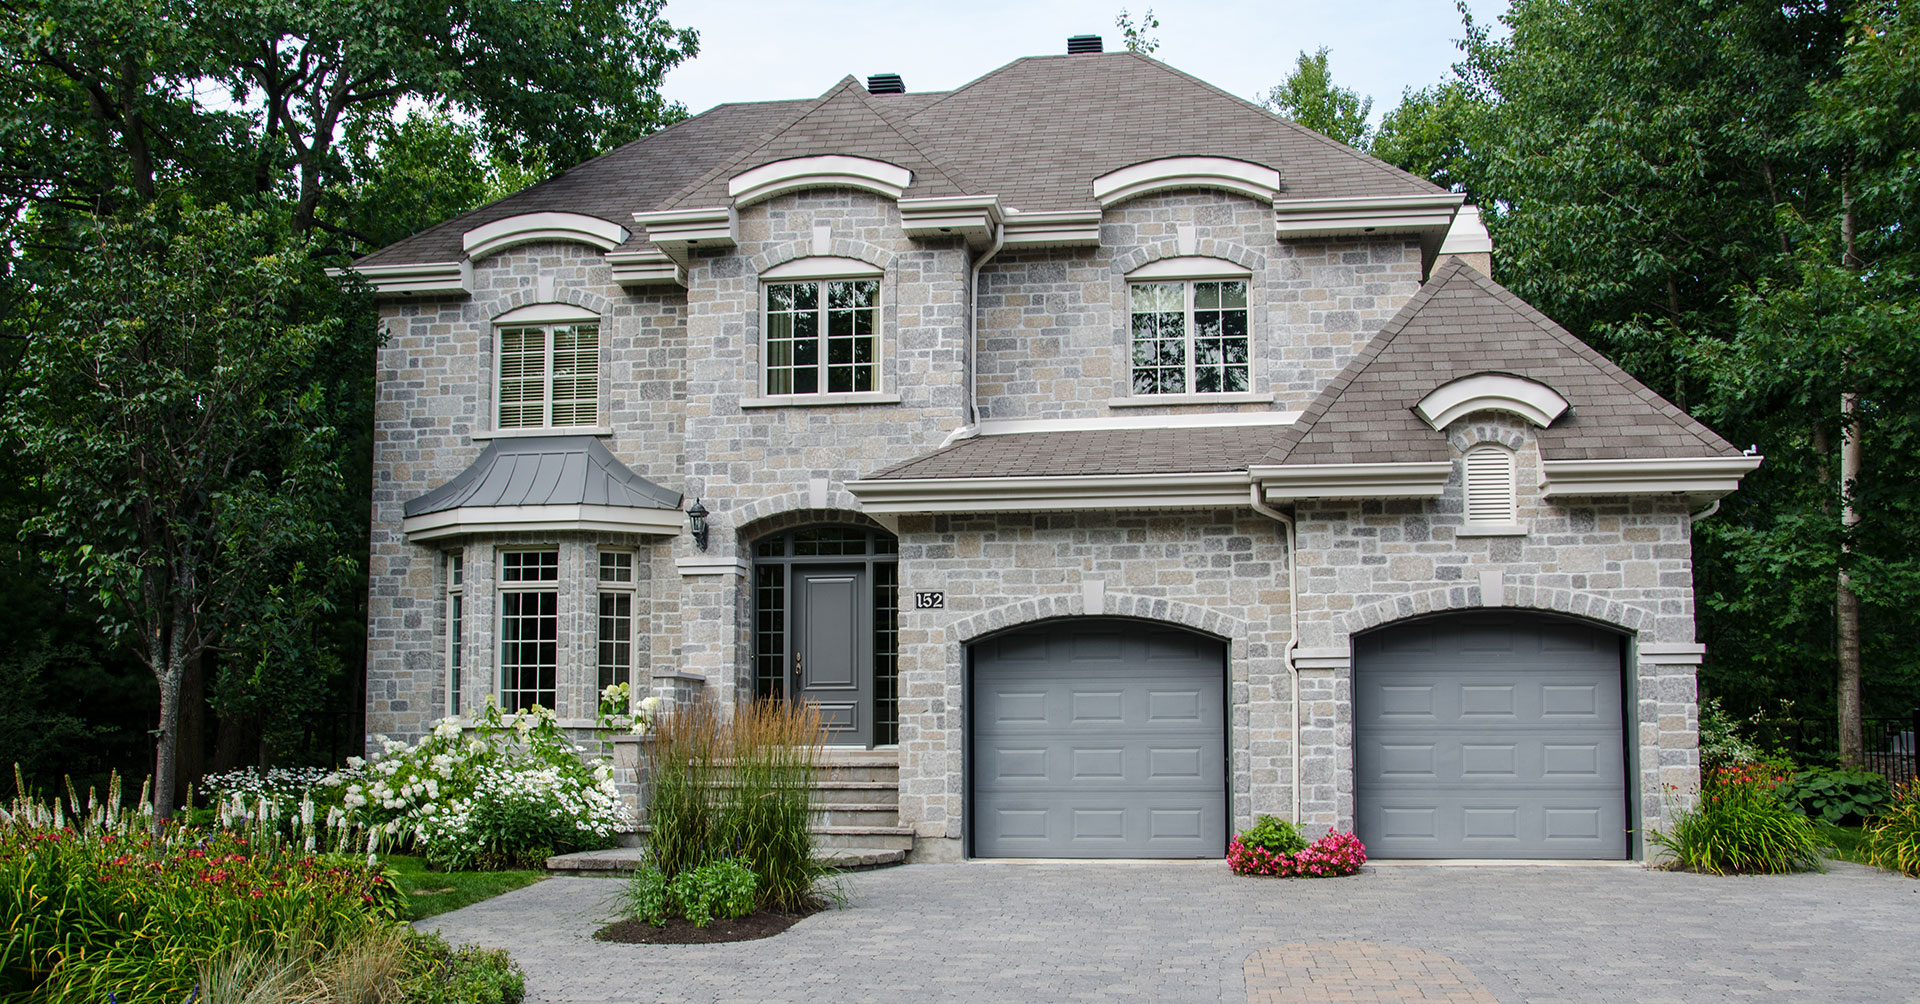 stonework from North York & toronto landscape designers and architects